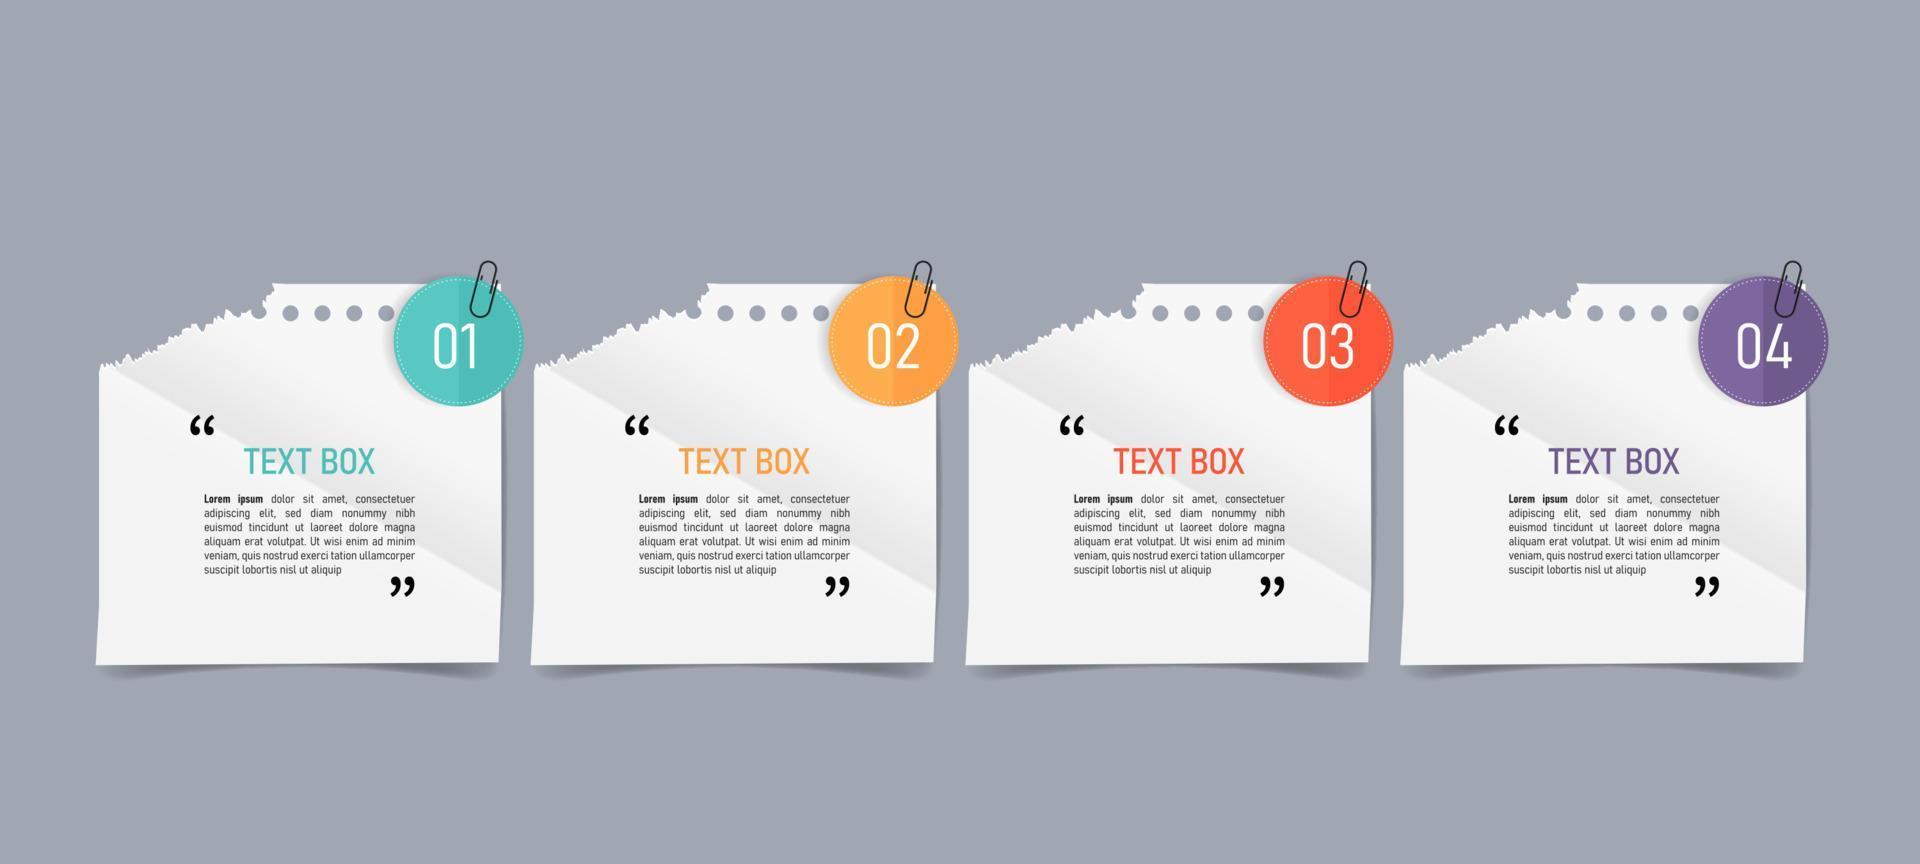 Text box design with note papers vector